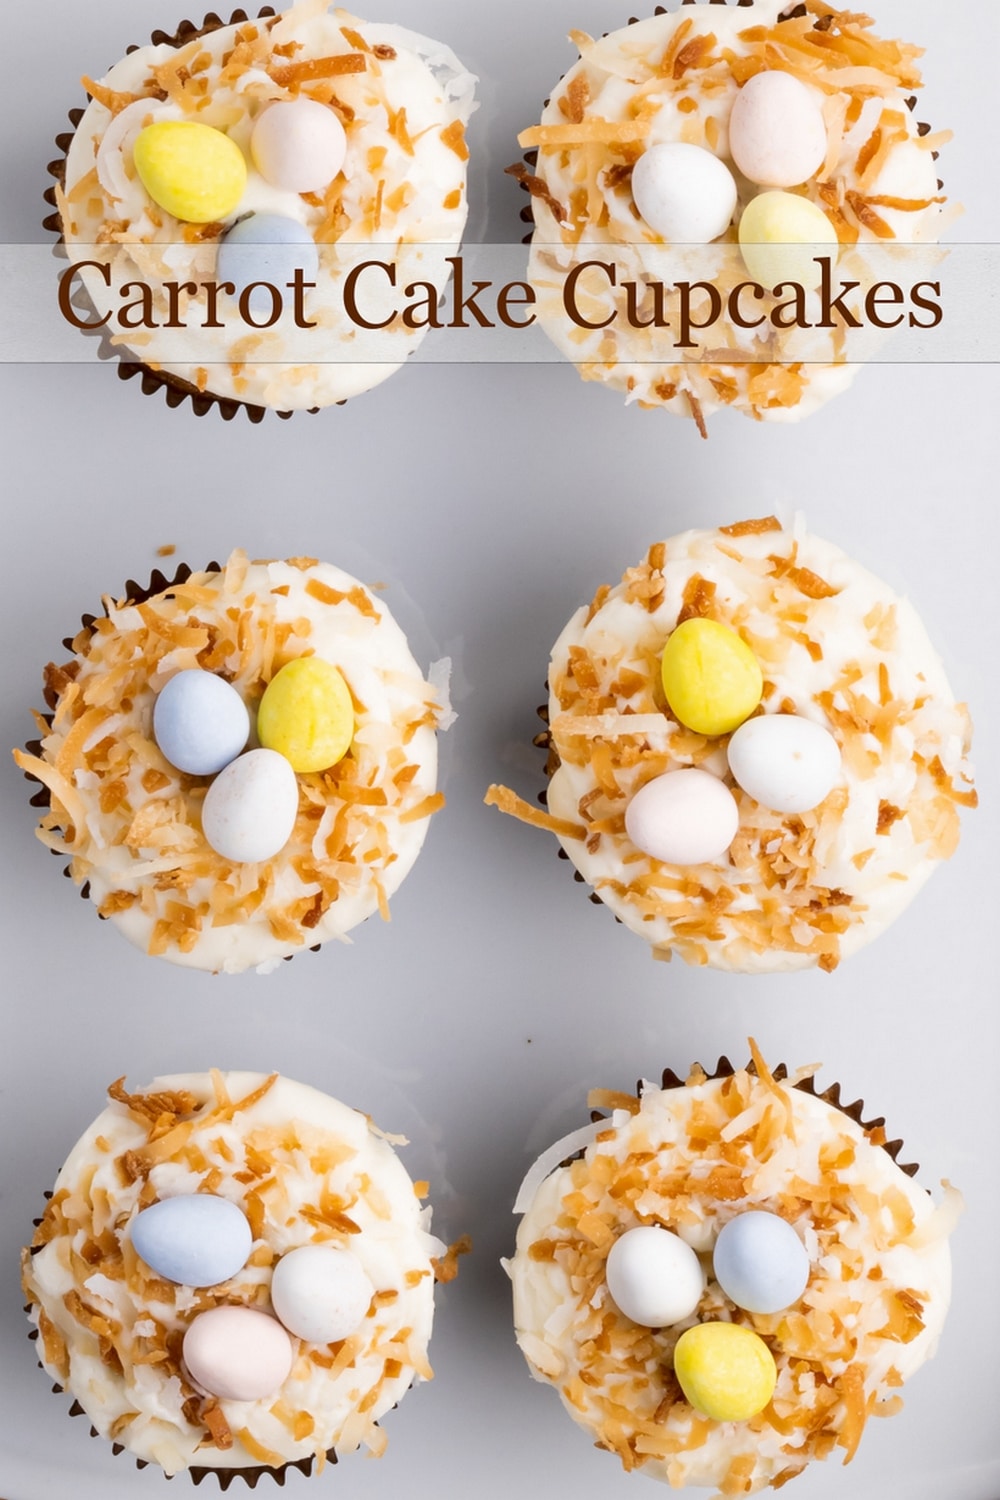 Carrot Cake Cupcakes let us infuse a hint of vegetables into dessert, while simultaneously adorning them with generous swirls of creamy and velvety cream cheese frosting. These cupcakes release a familiar aroma of cinnamon and nutmeg when baked, and the luscious cream cheese frosting adds the fluffy and sugary finish we all want in a dessert. via @cmpollak1